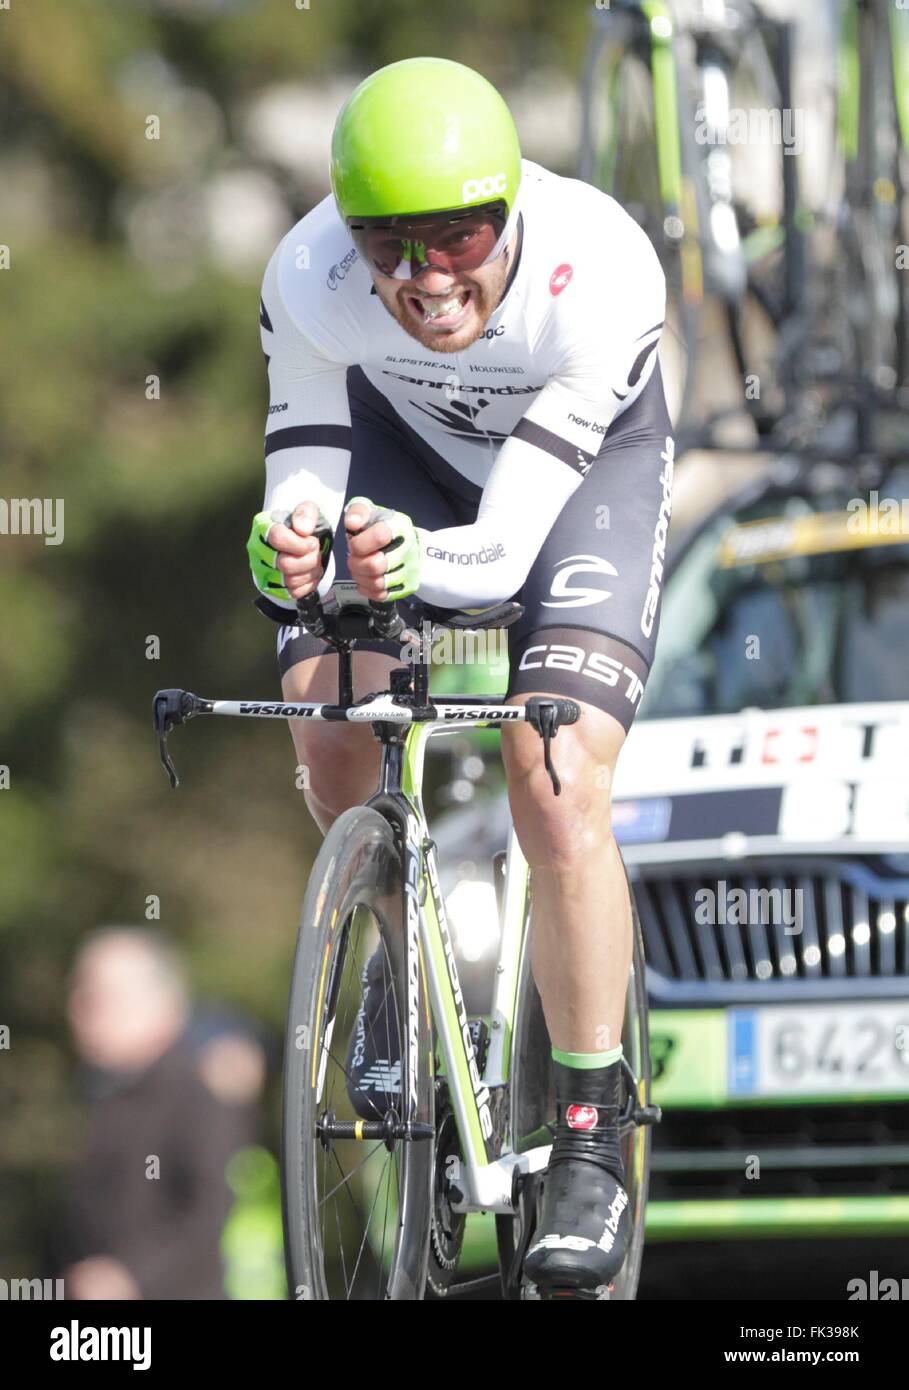 Conflans-Sainte-Honorine, France. 06th Mar, 2016. Patrick Befin (orica Greenedge) during the prologue of Paris - Nice March 6, 2016 in Conflans-Sainte-Honorine, France Credit:  Laurent Lairys/Agence Locevaphotos/Alamy Live News Stock Photo